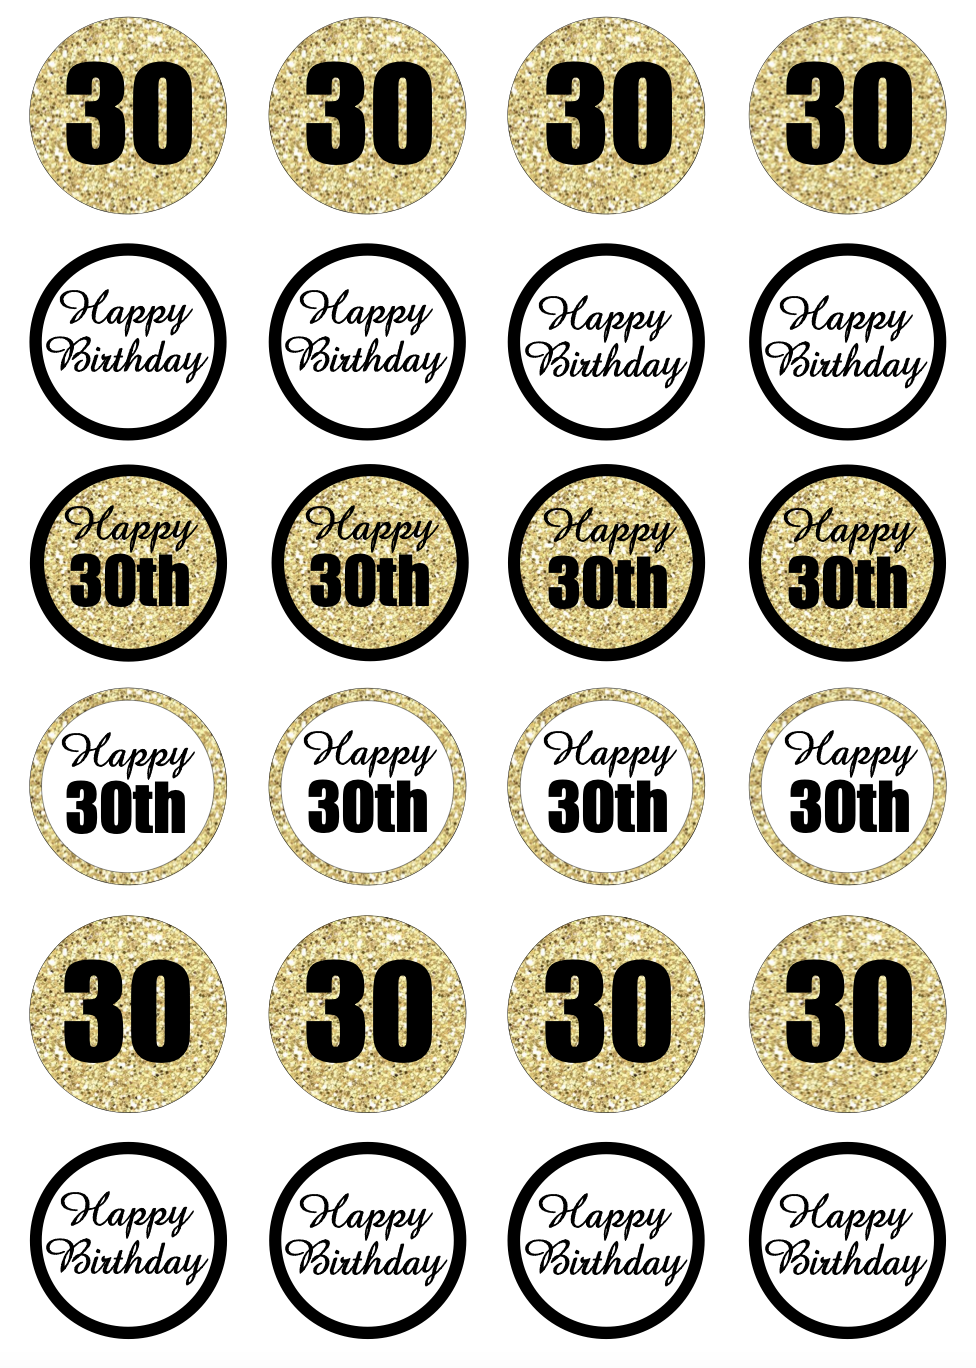 30th Birthday Black & Gold Cupcake Edible Icing Image Toppers